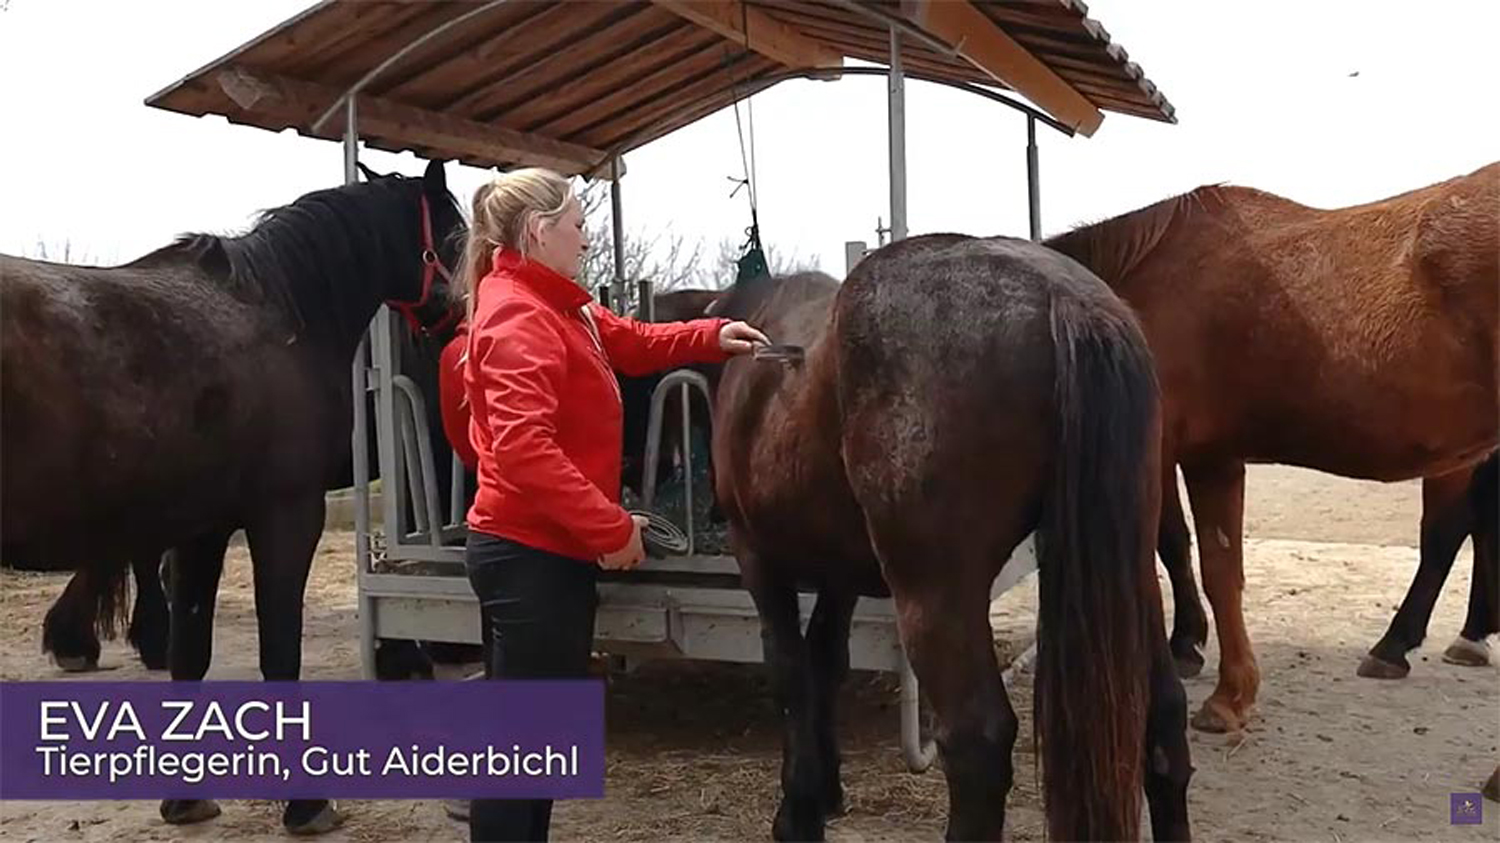 Video - Natural pain reduction in rescued animals